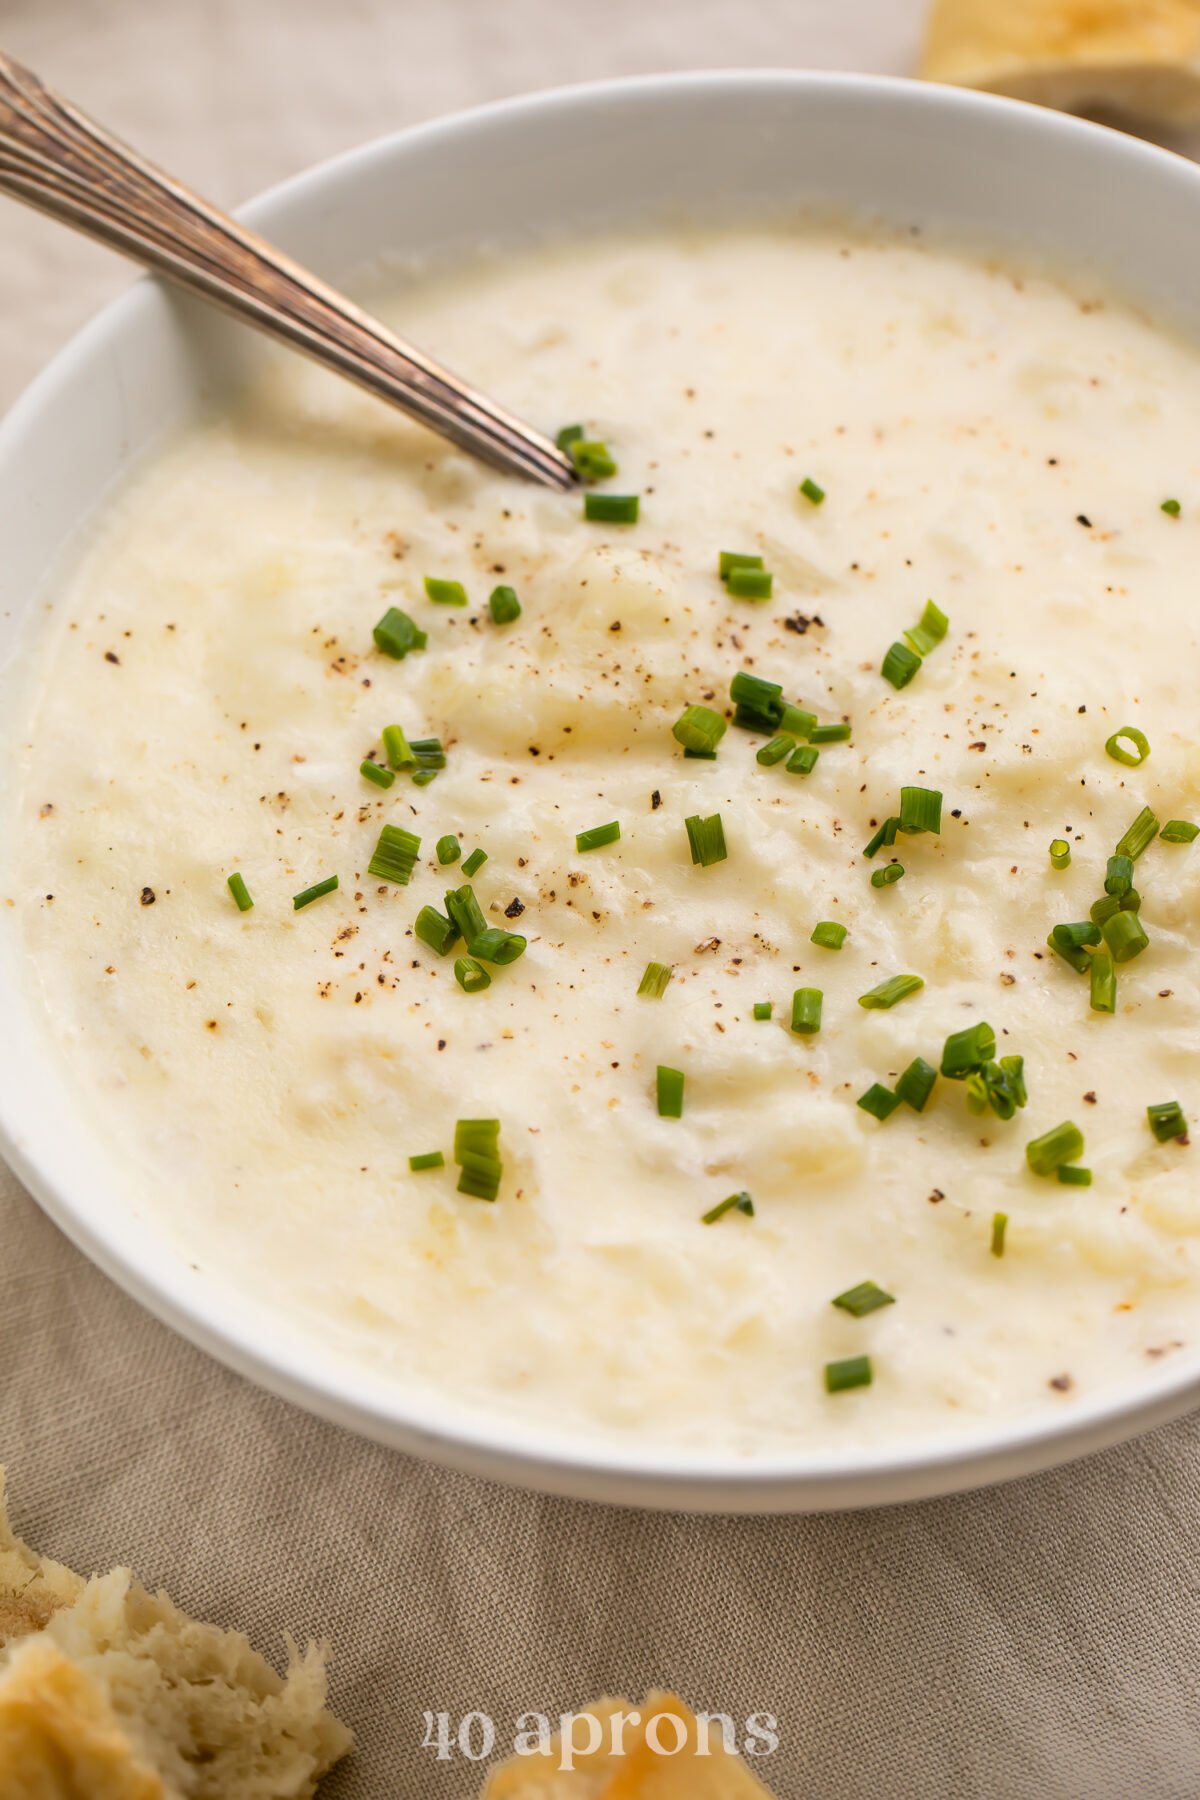 Angled view of a bowl of creamy old-fashioned potato soup topped with green onions.